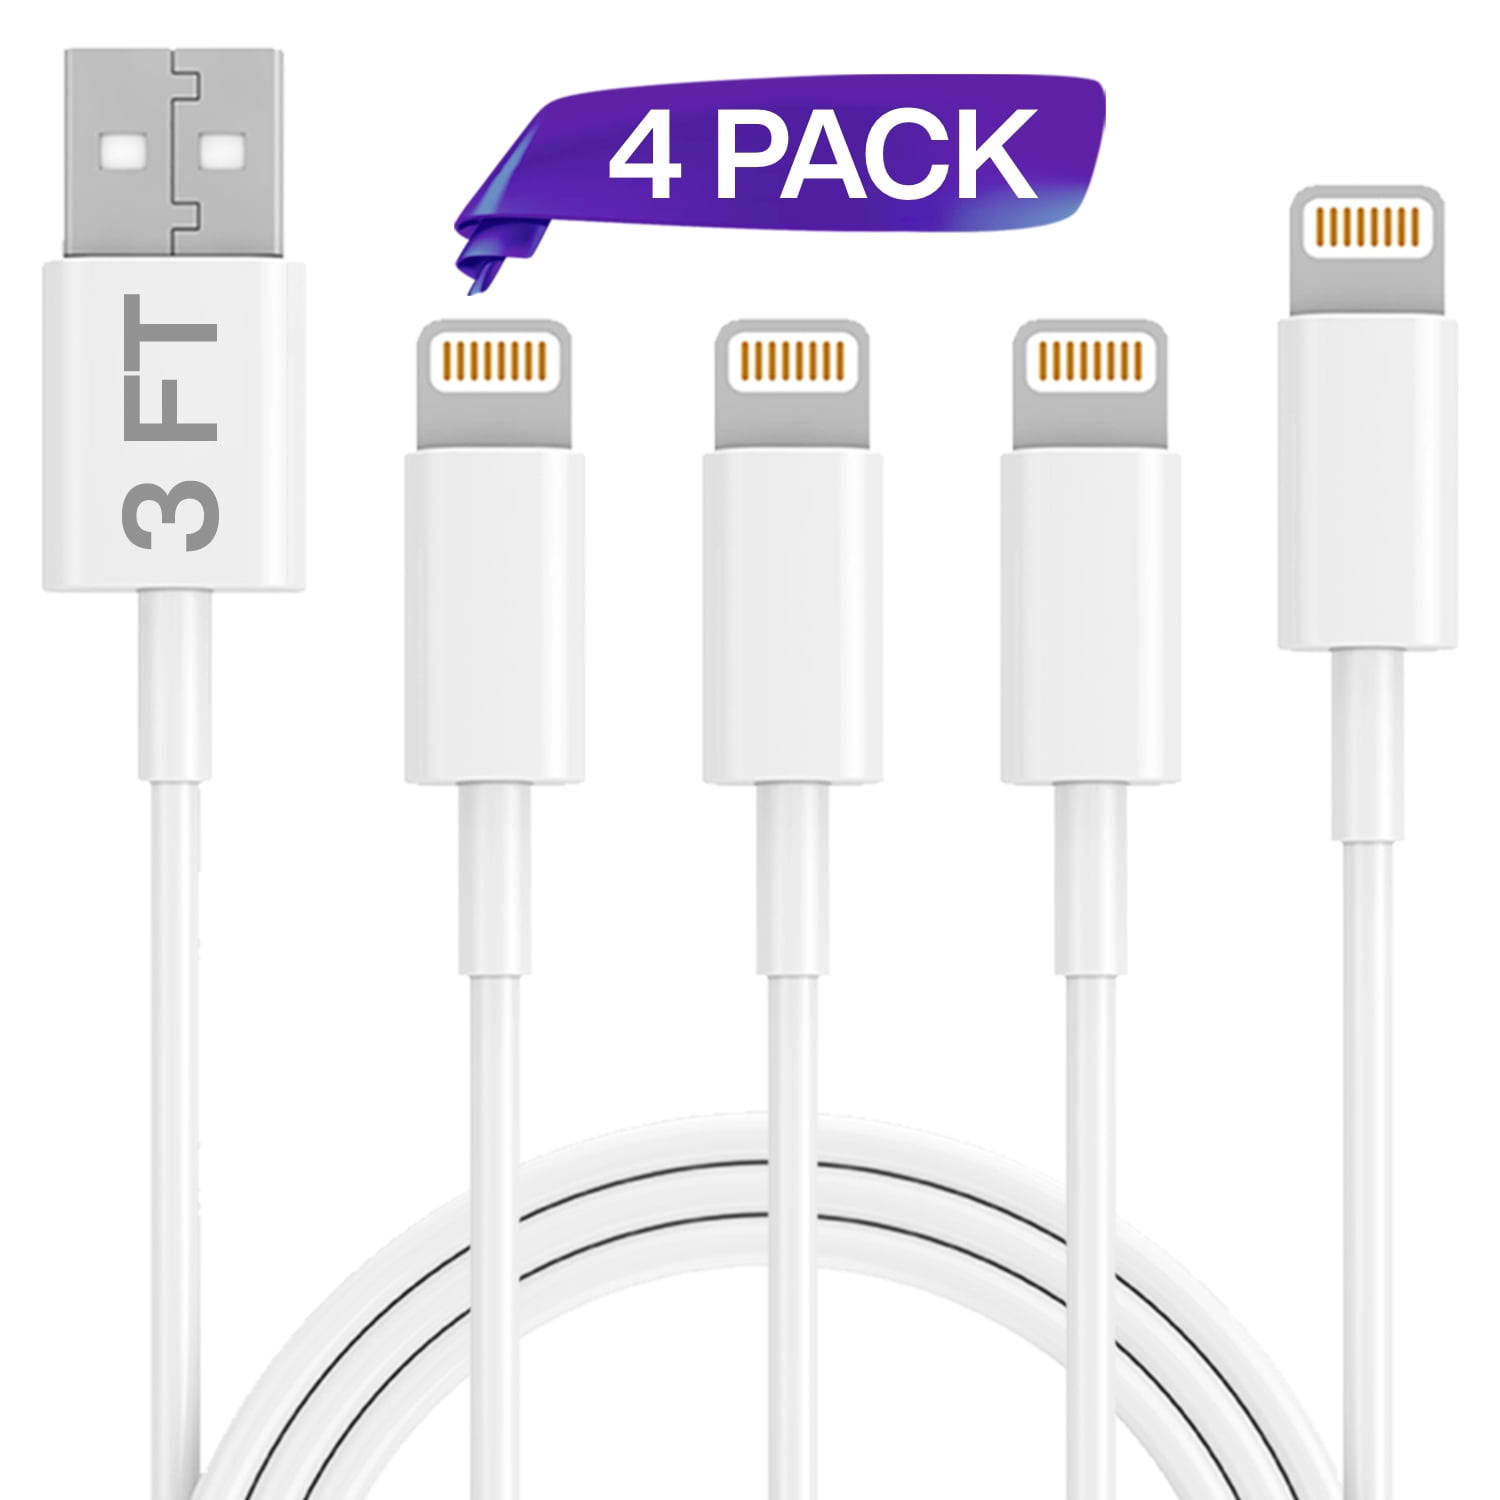 iPhone Charger MFi Certified Cable 6Pack 3FT 3FT 3FT 6FT 6FT 10FT Extra Long Nylon Braided USB Fast Charging& Syncing Cord Compatible with iPhone/XS/XR/X/8/8Plus/7/7Plus/6S/6Plus/Pad More 